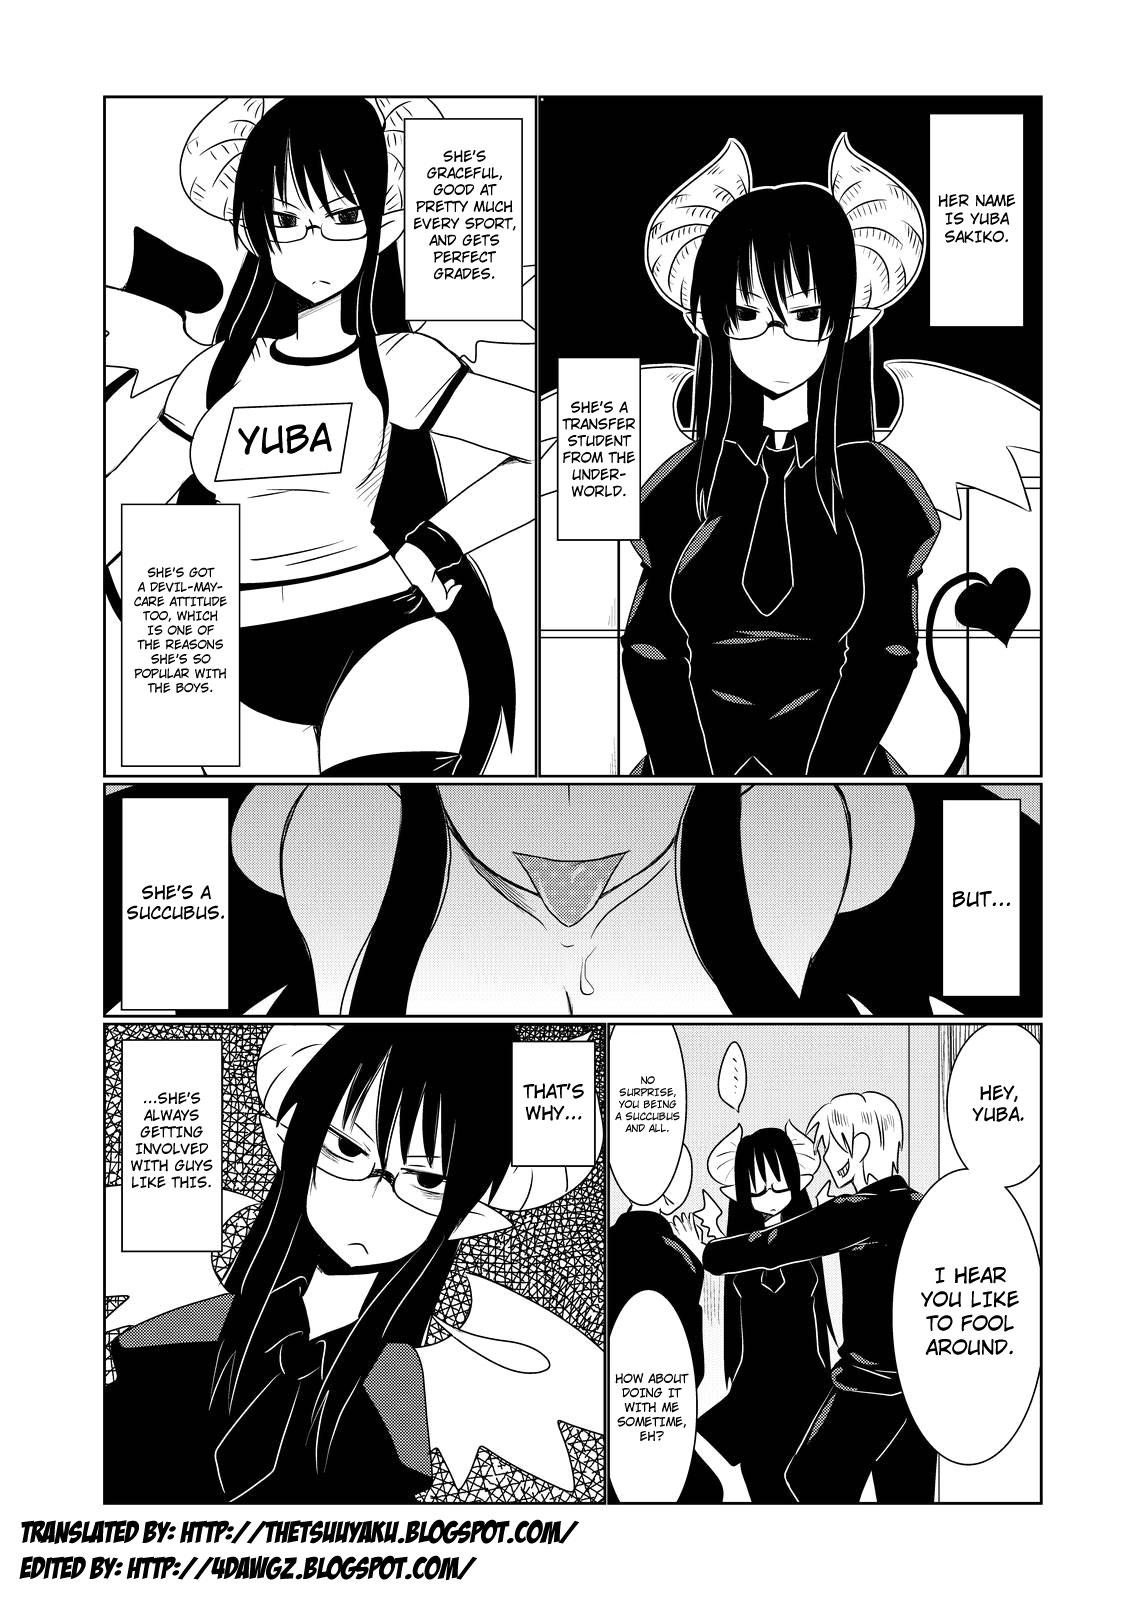 Blowjob Contest JK Succubus no Renai Jijou. | Thoughts on Love by a Female High School Succubus Exhibitionist - Page 2